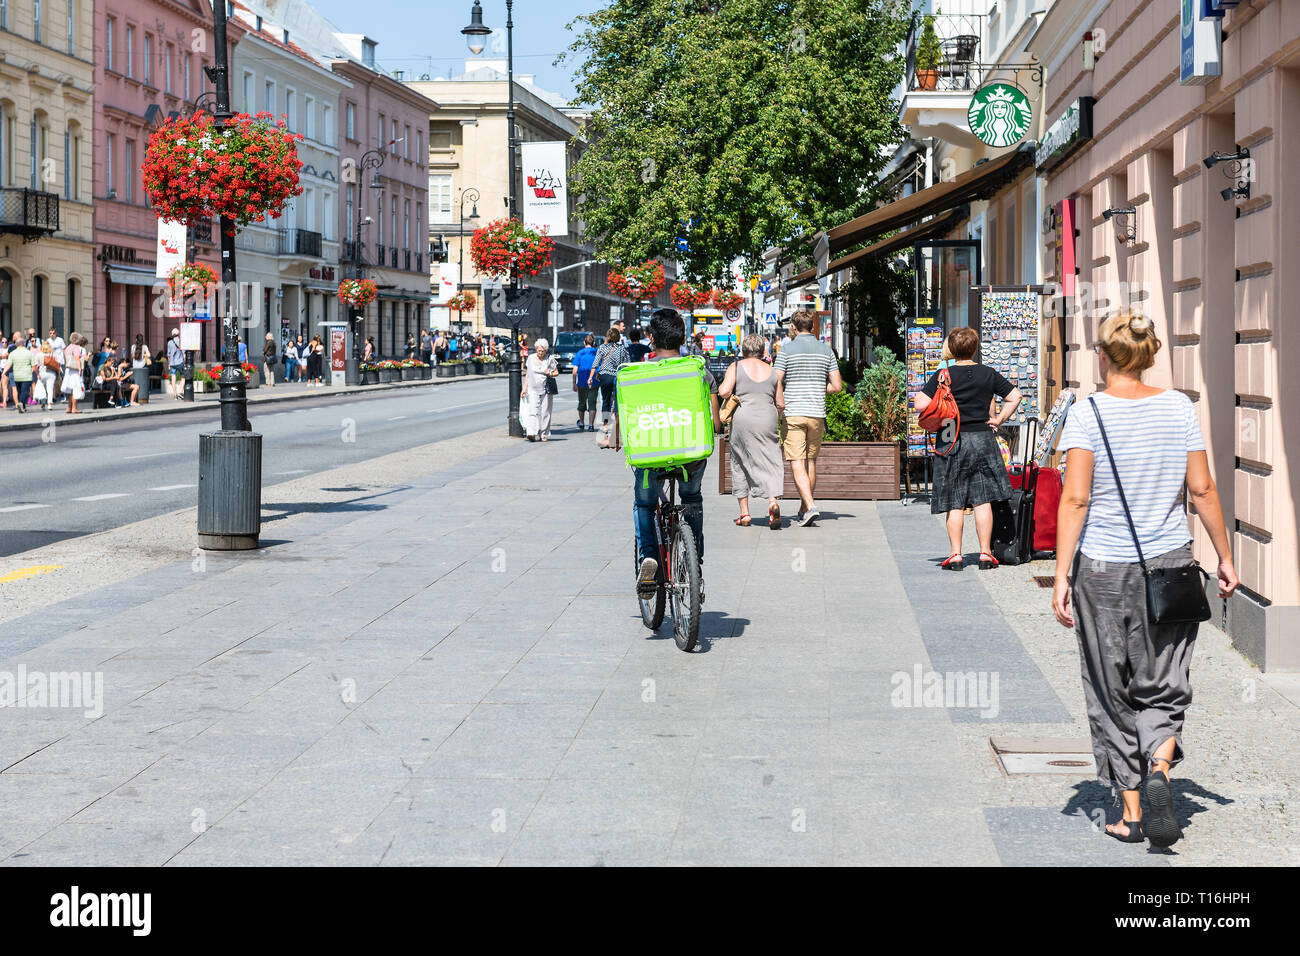 Warsaw, Poland - August 23, 2018: Uber eats bicycle man with green bag in old town historic street in capital city during sunny summer day called Krak Stock Photo